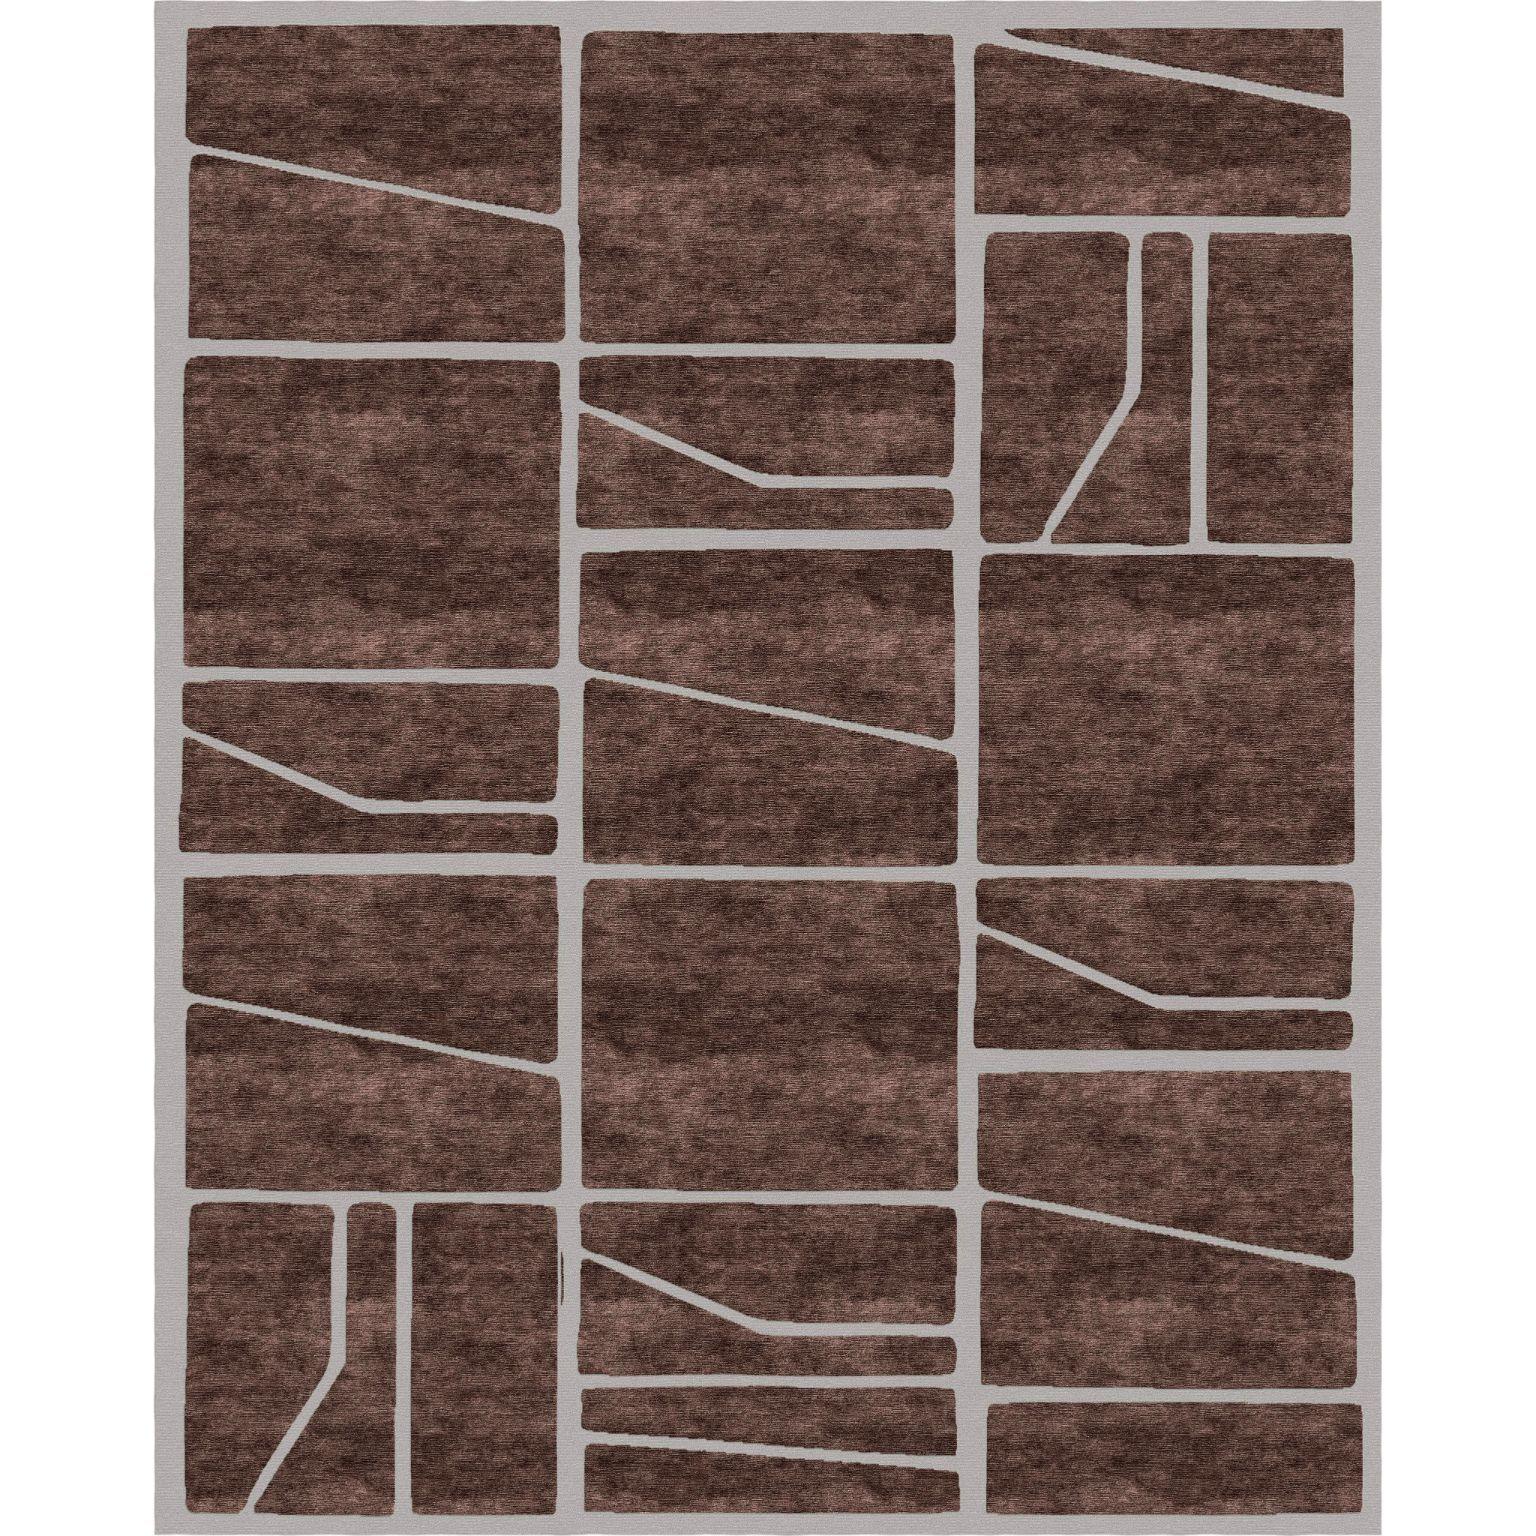 Terracotta tiles large rug by Art & Loom
Dimensions: D 304.8 x H 426.7 cm
Materials: New Zealand wool & Chinese silk—loop & cut
Quality (Knots per Inch): 100
Also available in different dimensions.

Samantha Gallacher has always had a keen eye for